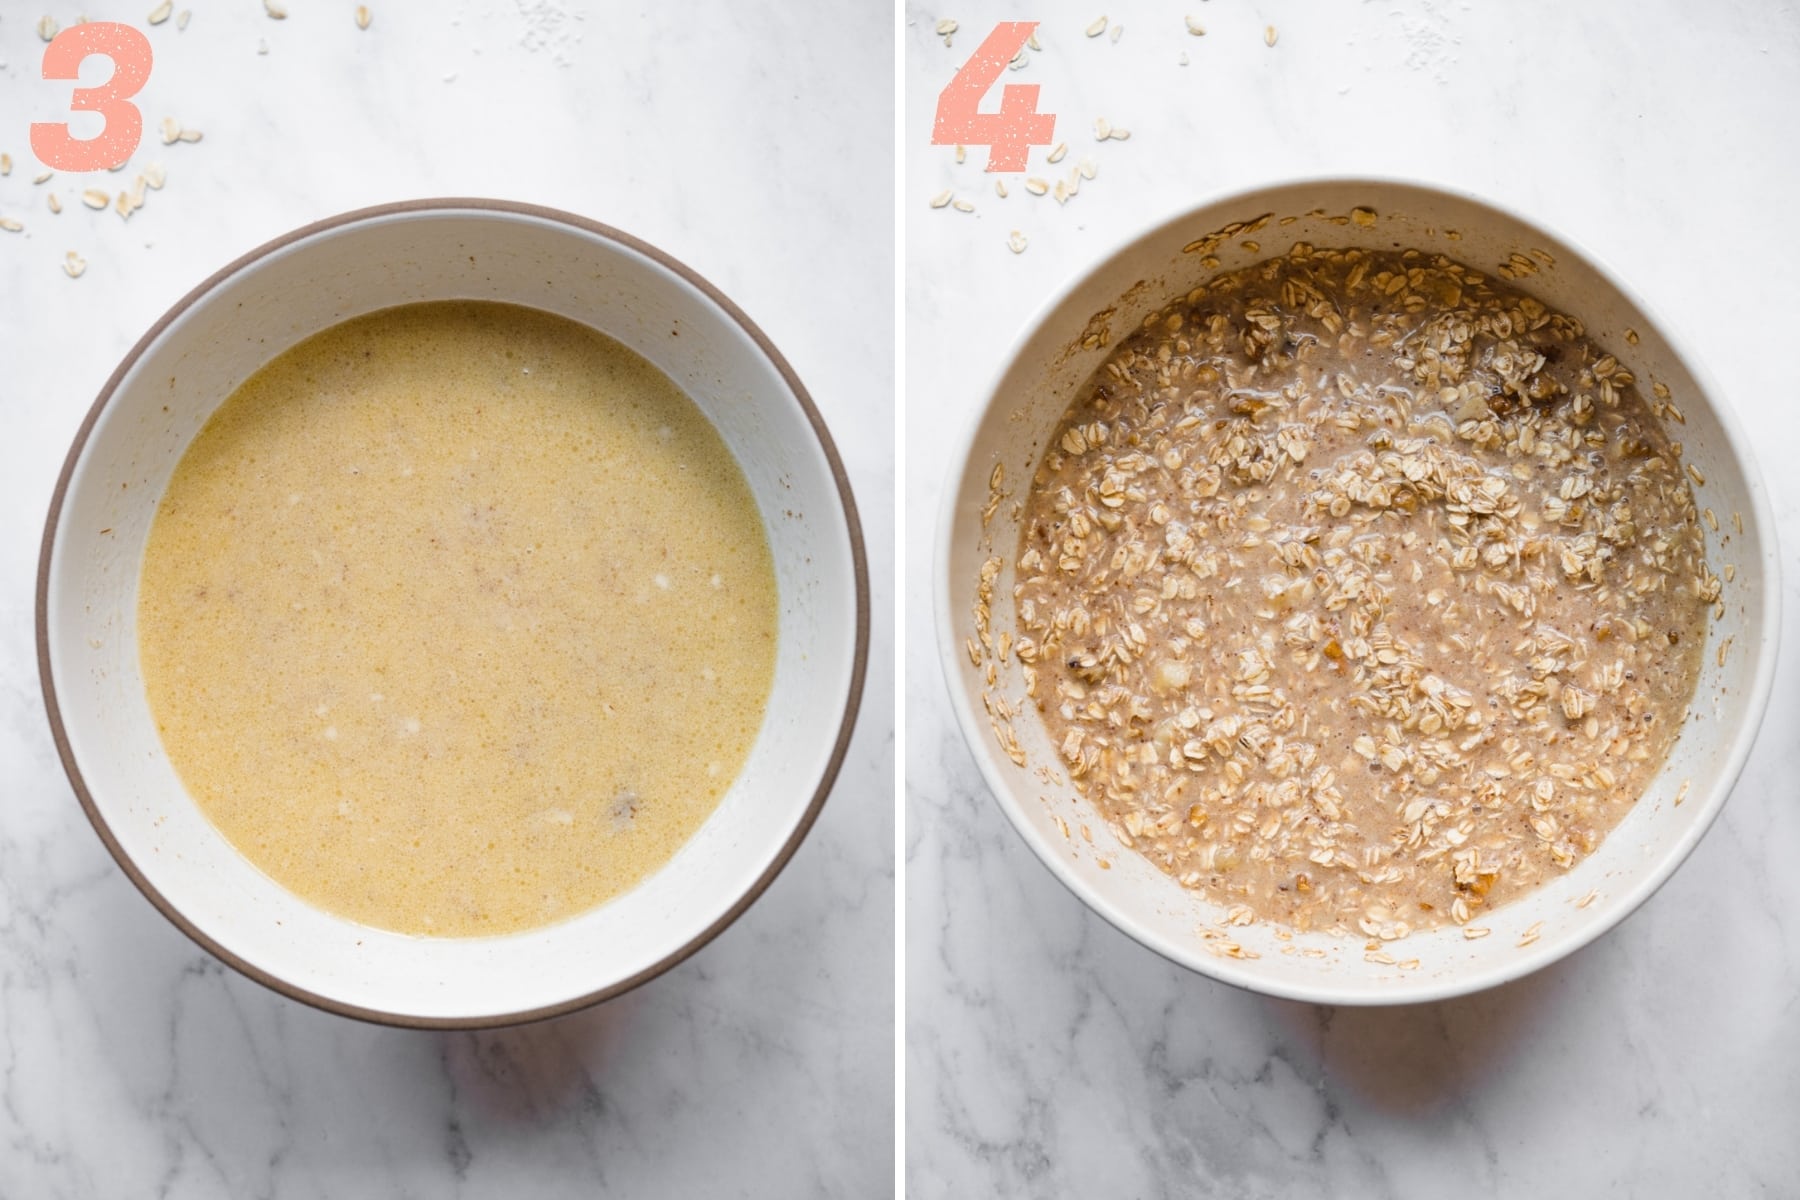 on the left: wet ingredients for baked oatmeal in mixing bowl. On the right: wet and dry ingredients mixed together in bowl. 